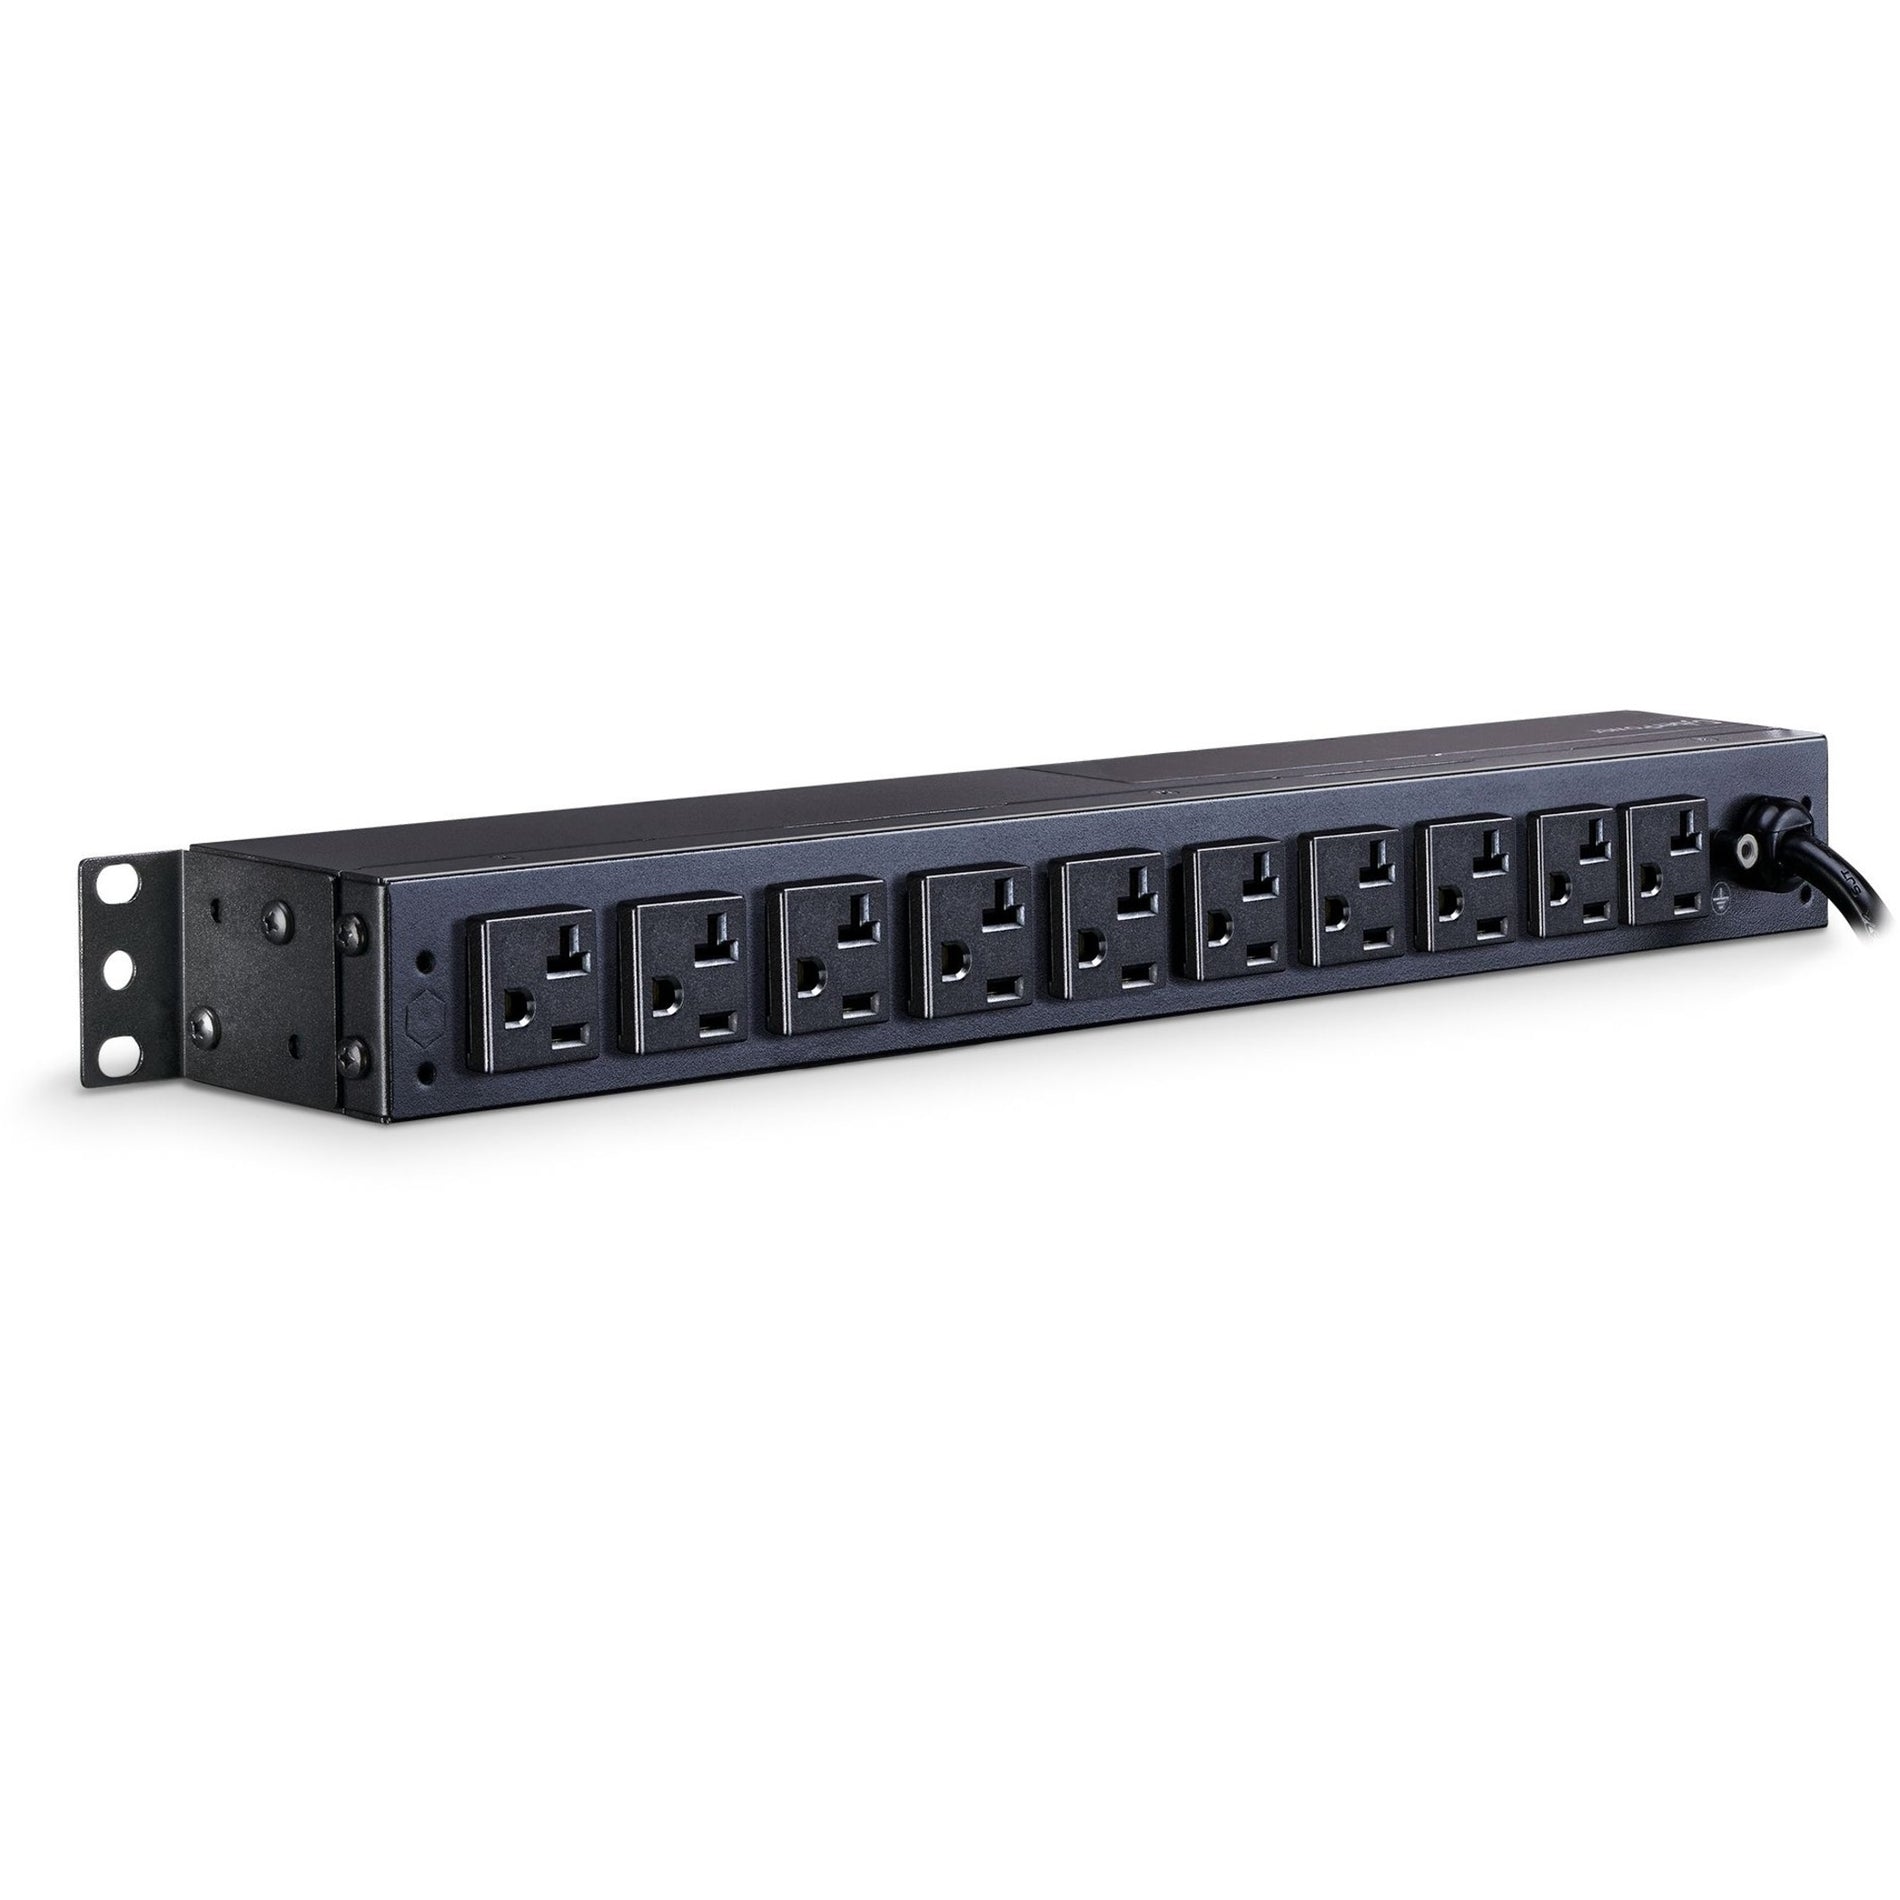 CyberPower PDU20M2F12R Metered PDU, 14-Outlets, 20A, 100-125V AC